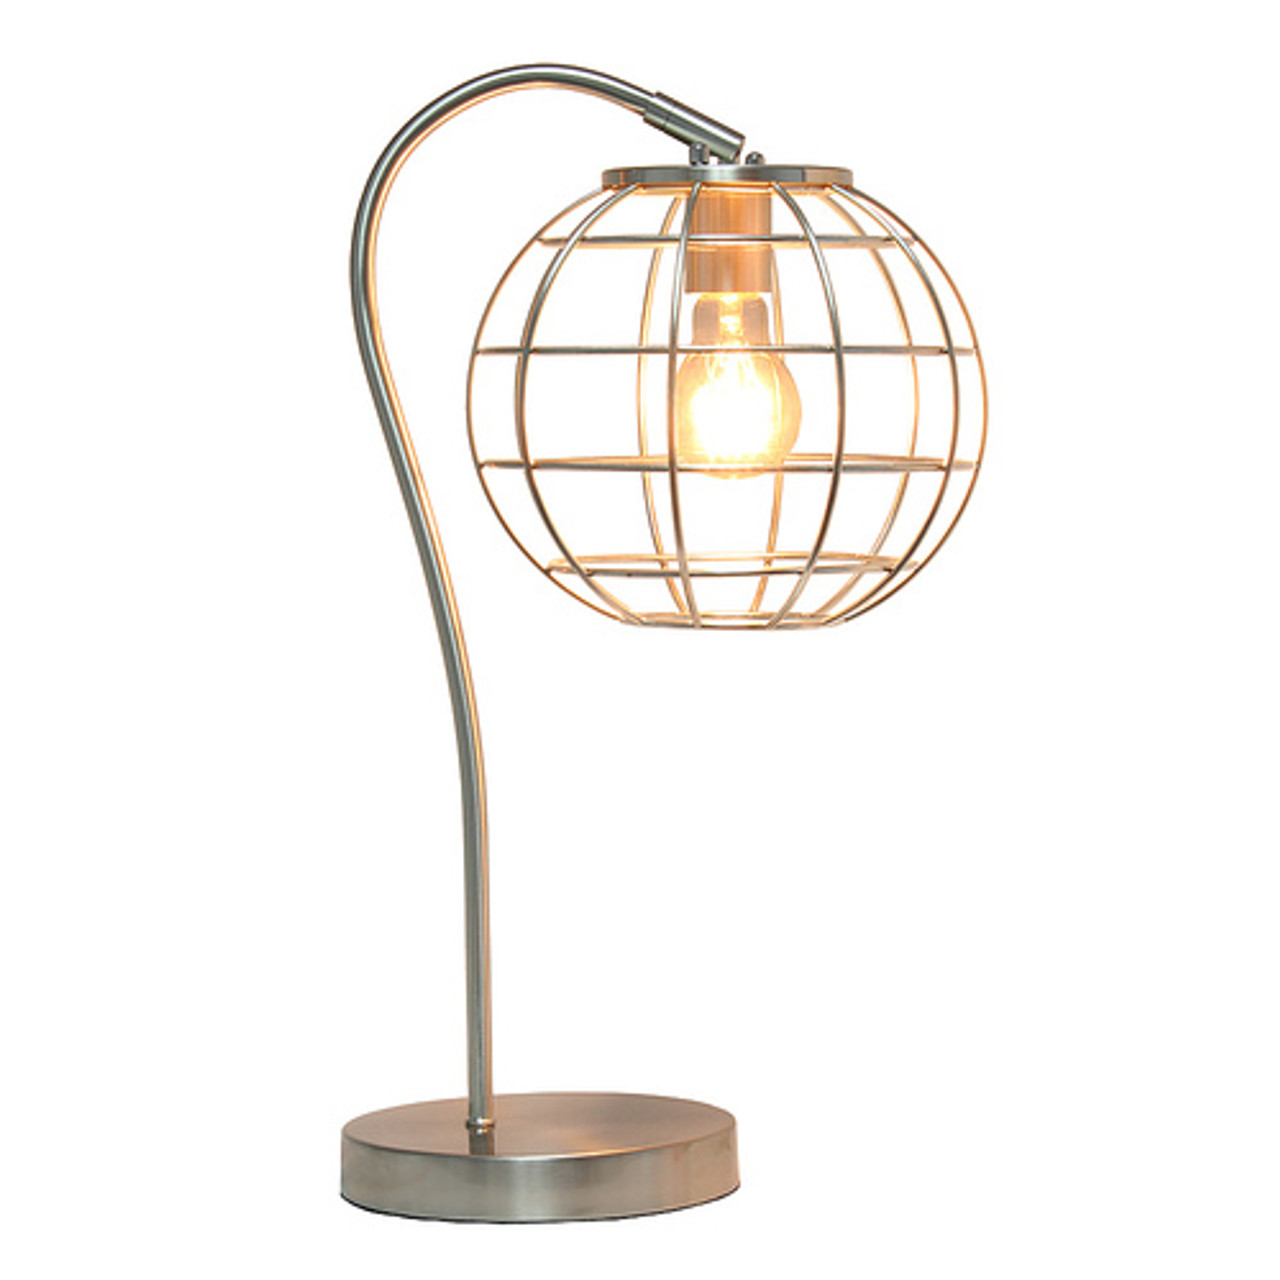 Lalia Home Arched Metal Cage Table Lamp, Brushed Nickel